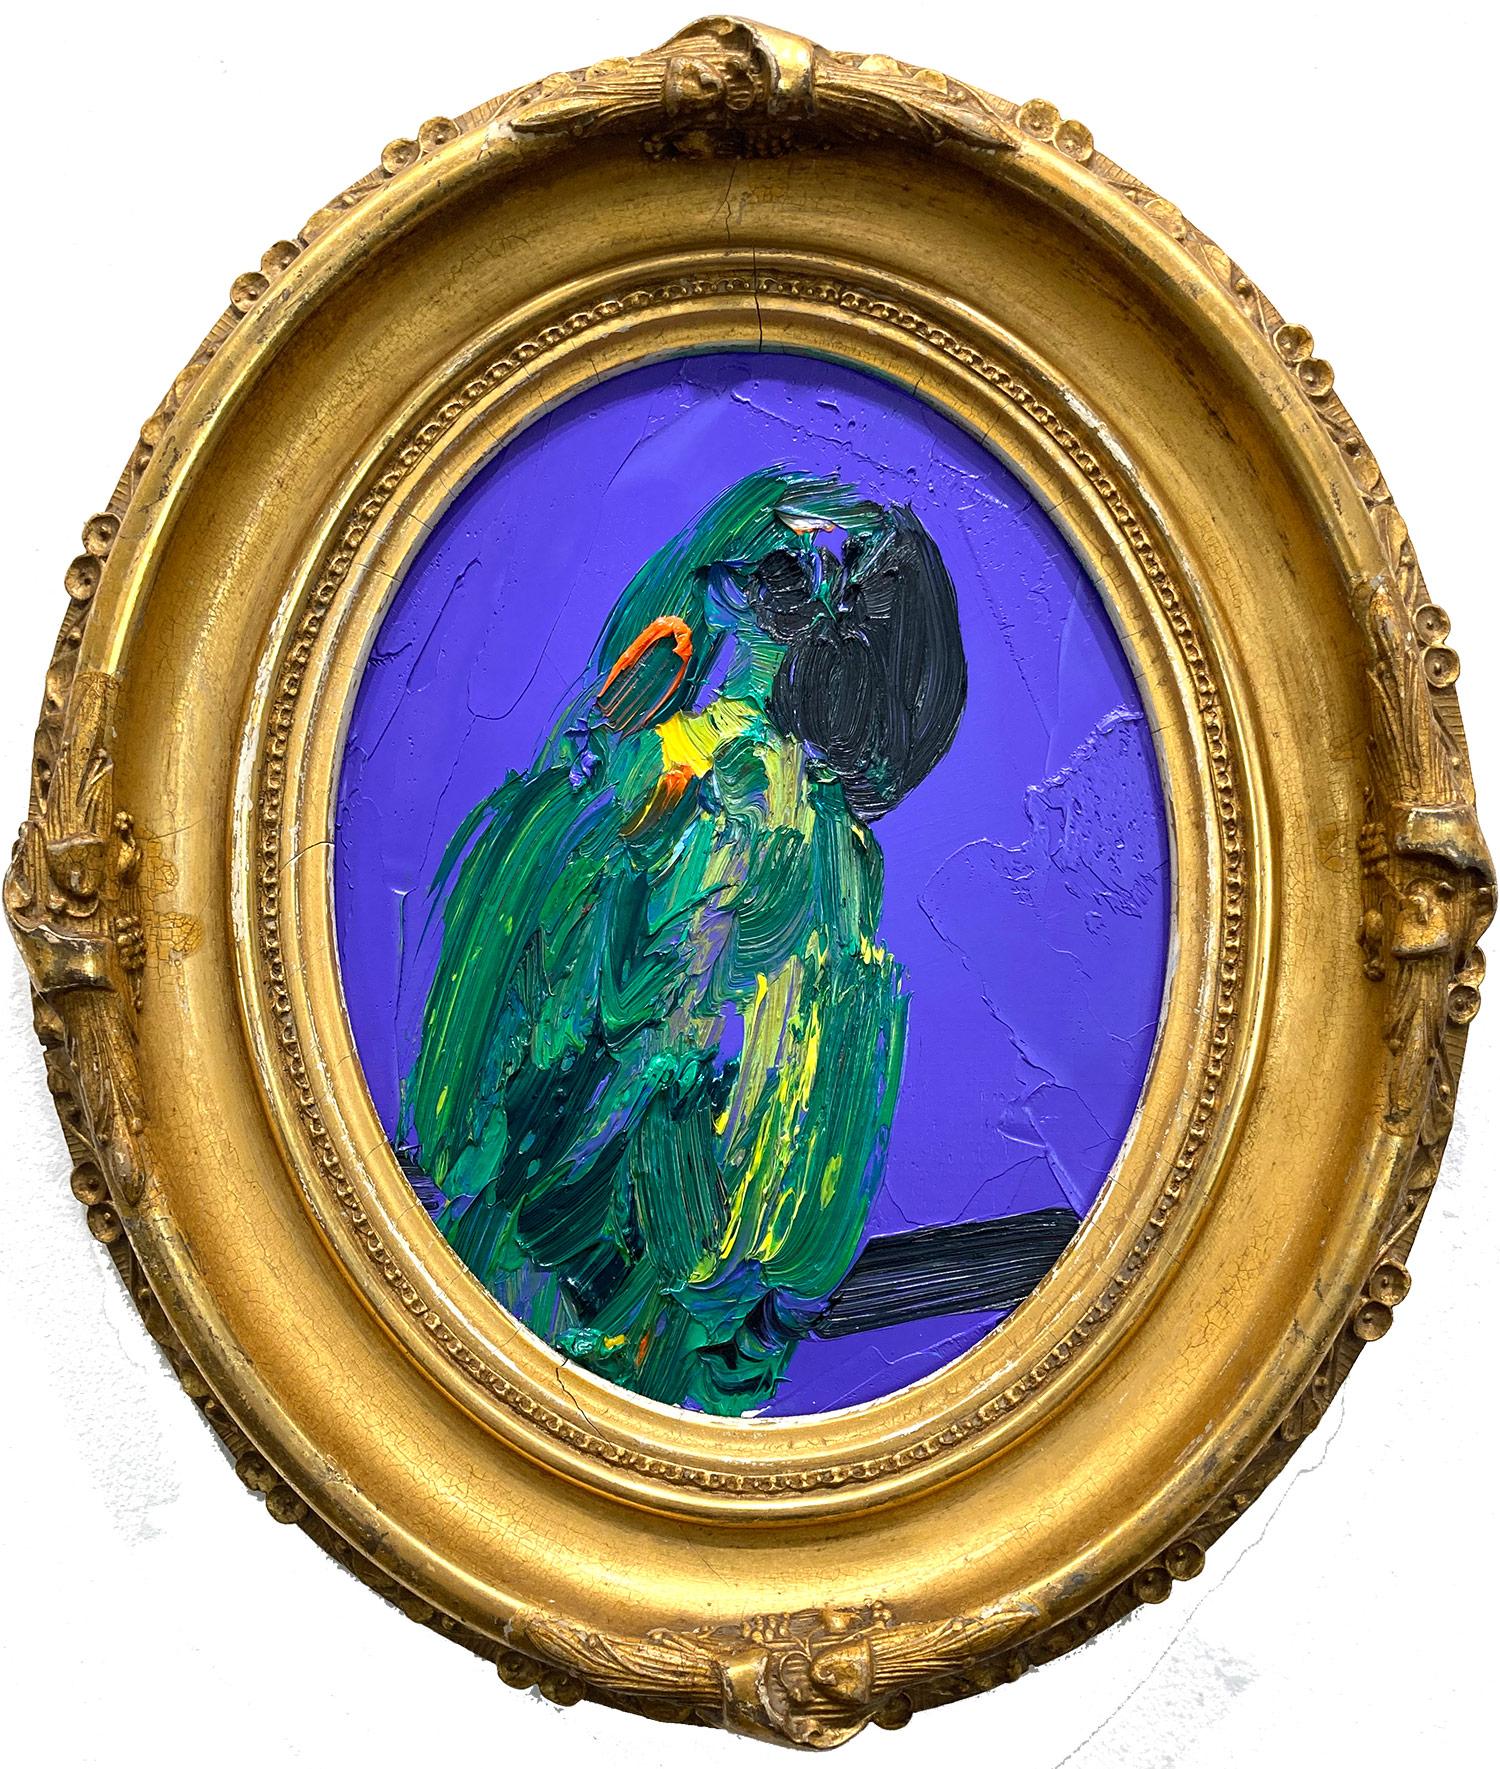 Hunt Slonem Animal Painting - "Amazon" Green Parrot on Blue Purple Background on Wood Panel Oil Painting 